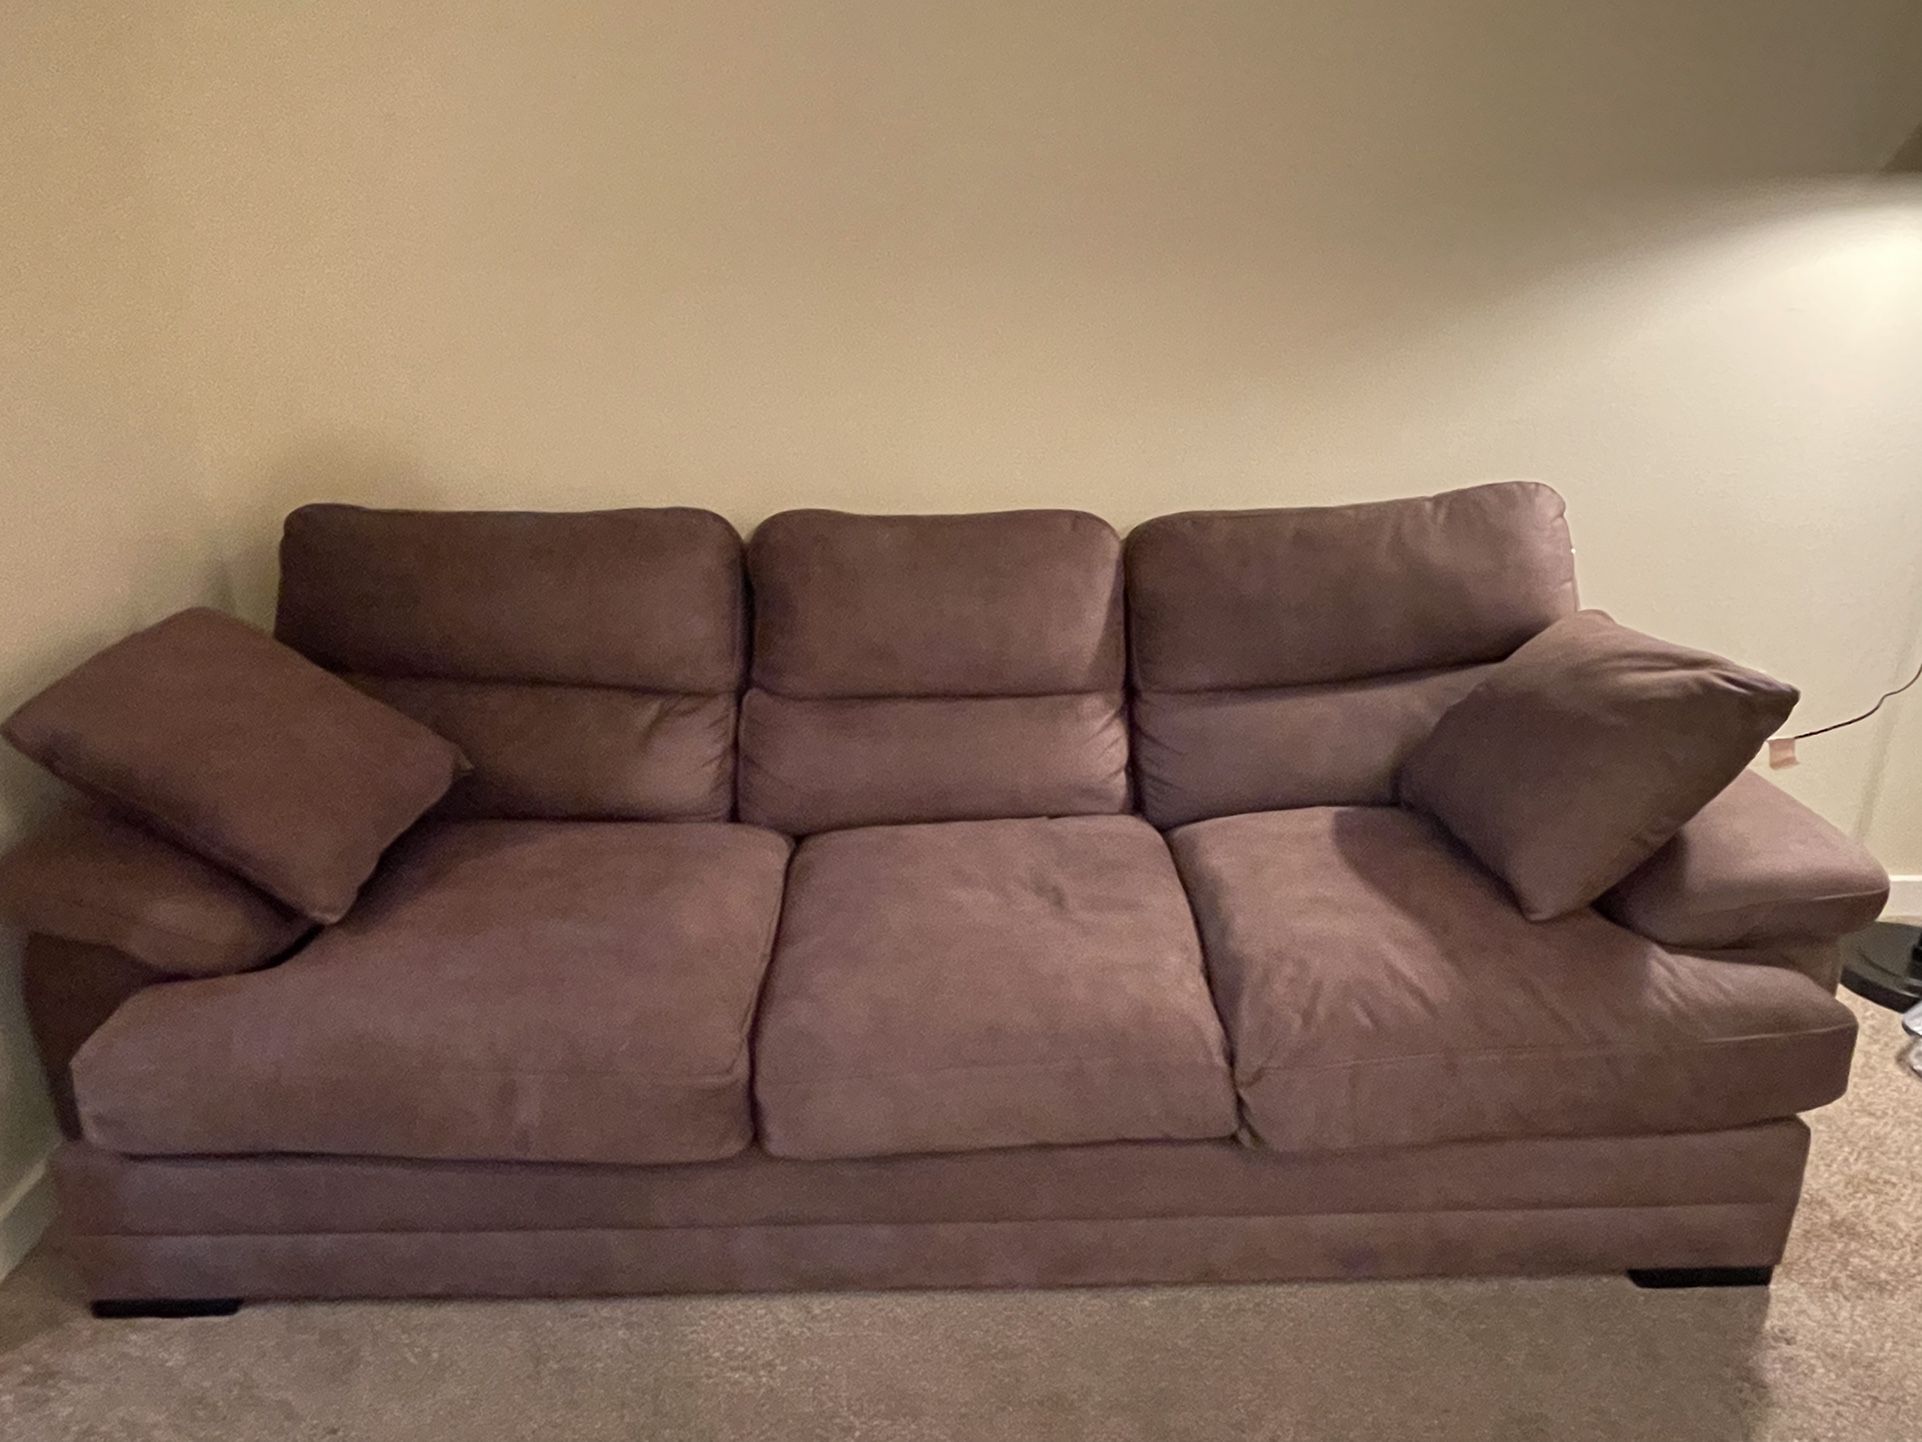 Luxurious Nearly New Couch - 8’6